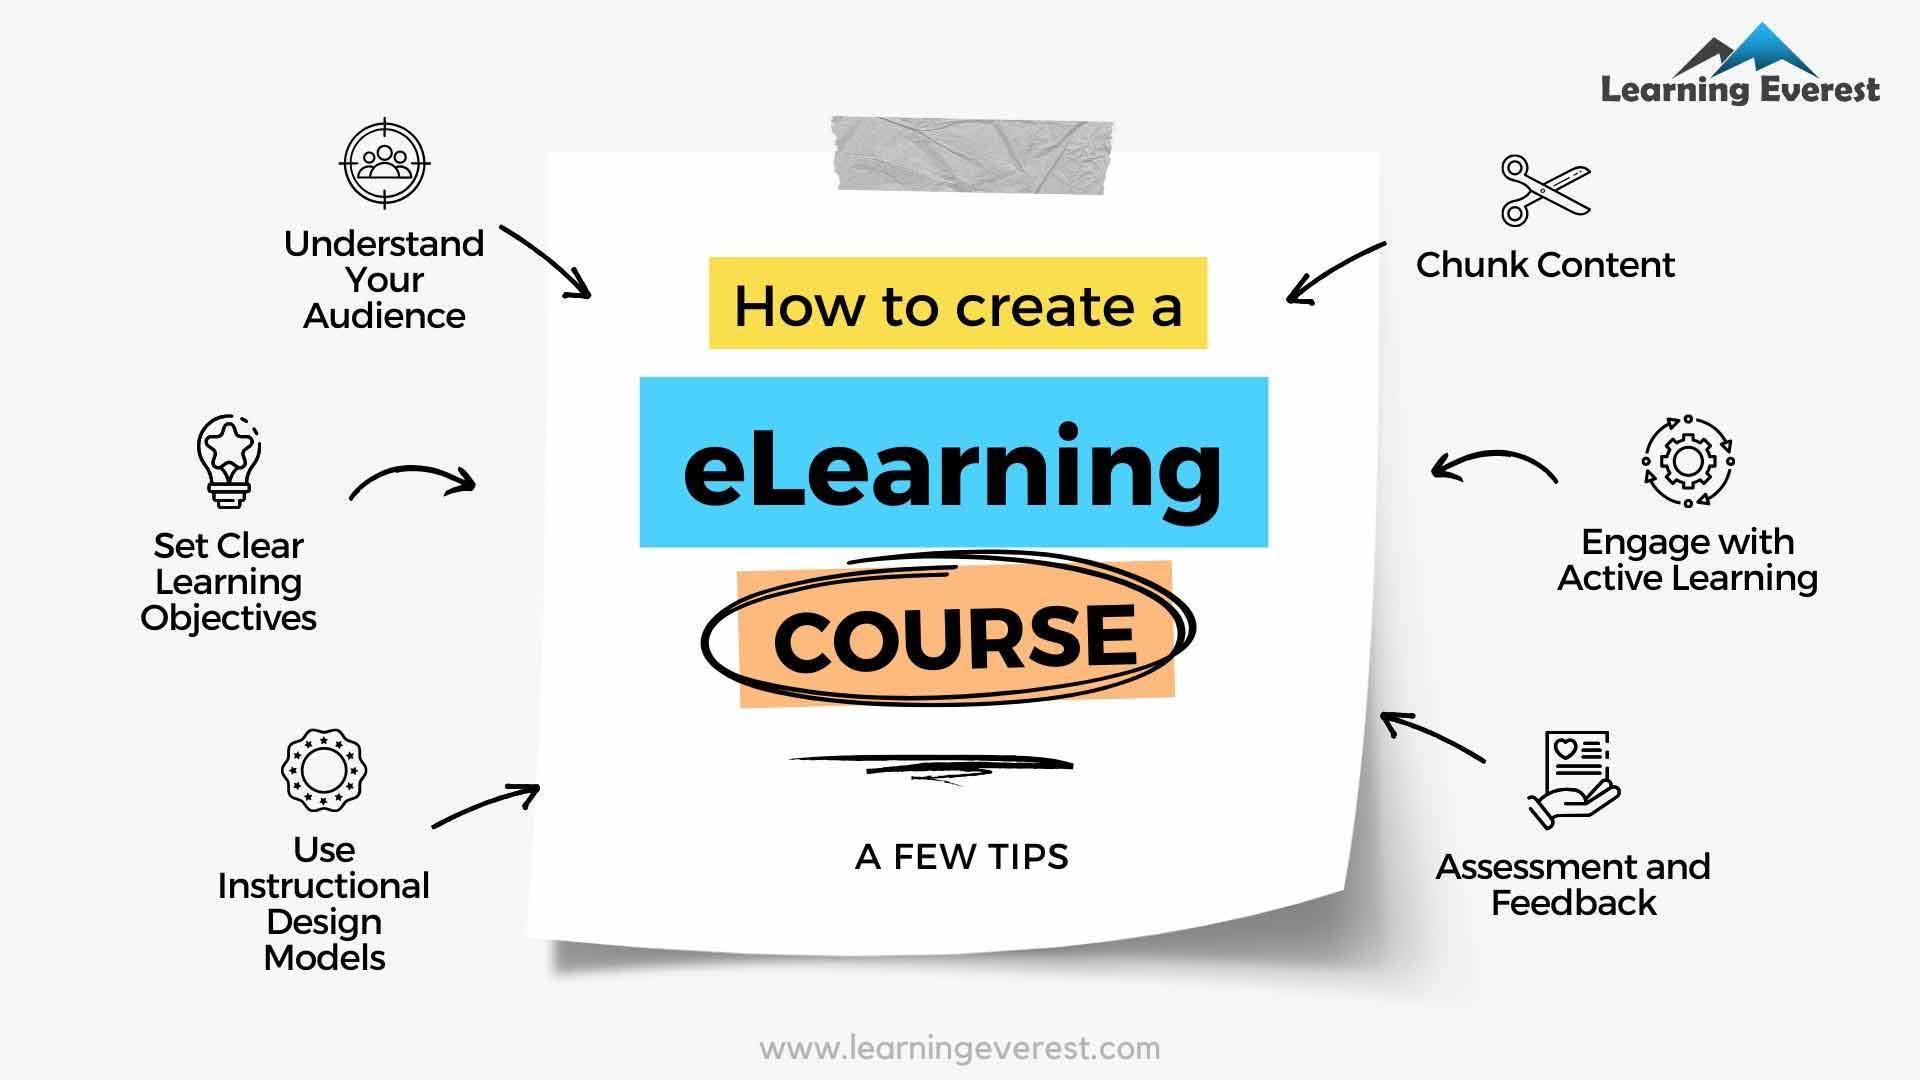 How to Create an eLearning Course - A Few Tips